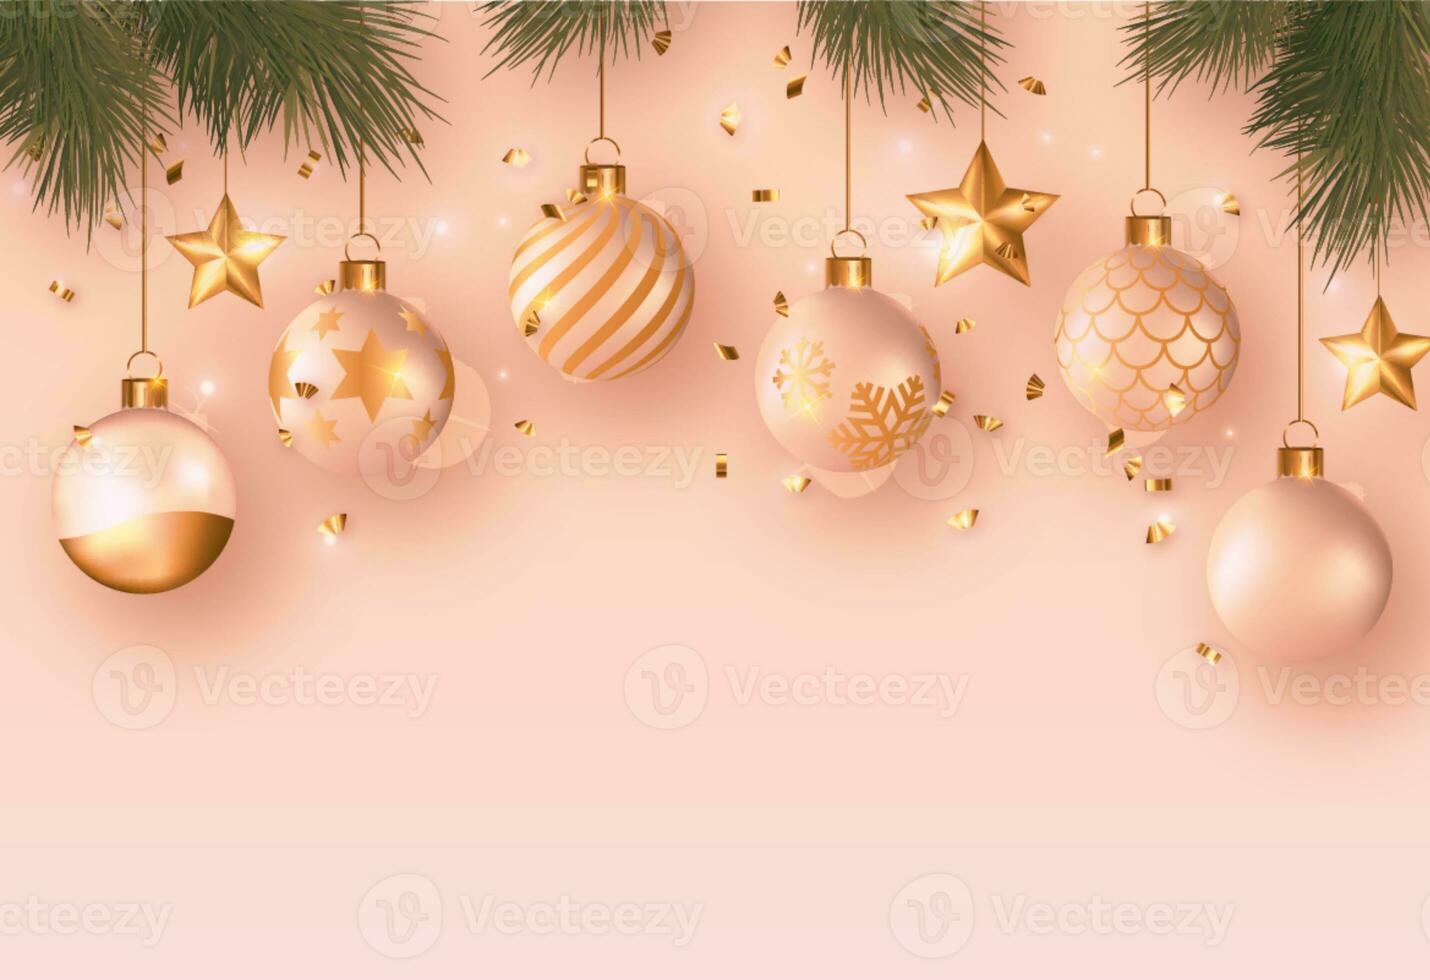 Christmas's background,holiday, festive background, decorate ball, snowflake, fir branch, celebration Christmas, decor, decoration, ornament, concept, flat, lay, photo